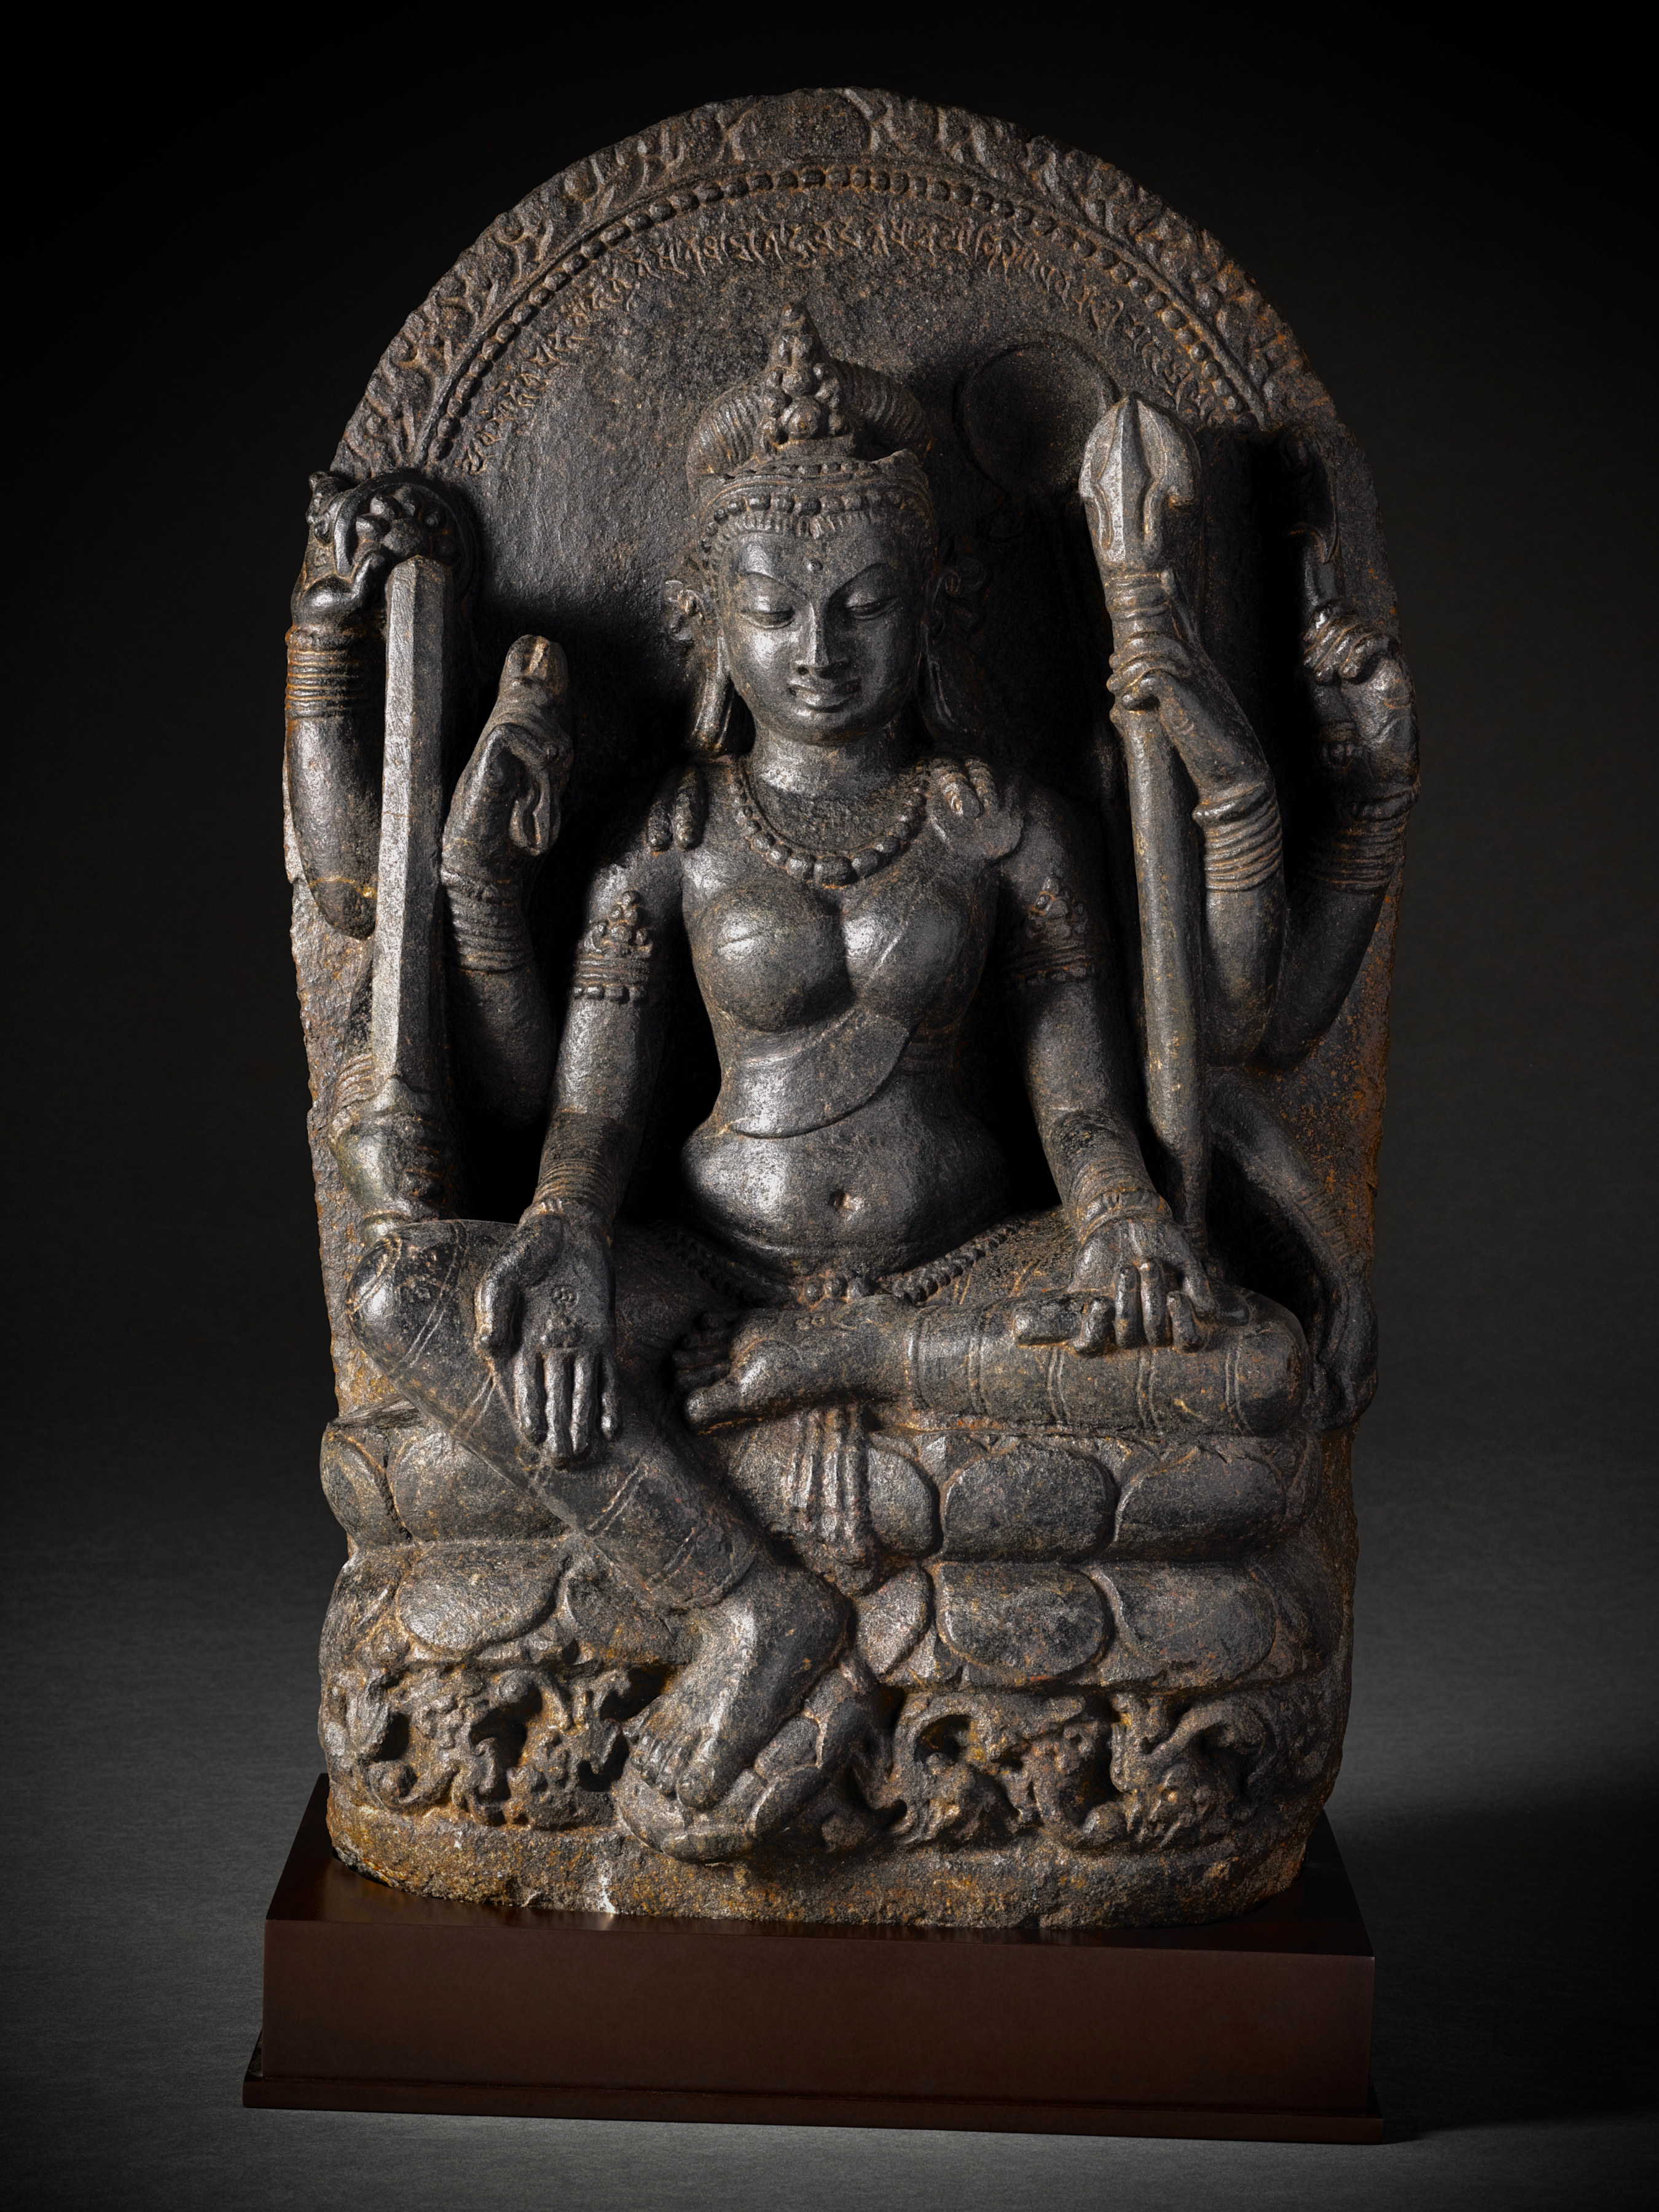 Larger photo of This remarkable sculpture portrays Mahapratisara, the principal Raksha goddess, with her distinctive eight arms adorned with various symbolic attributes.